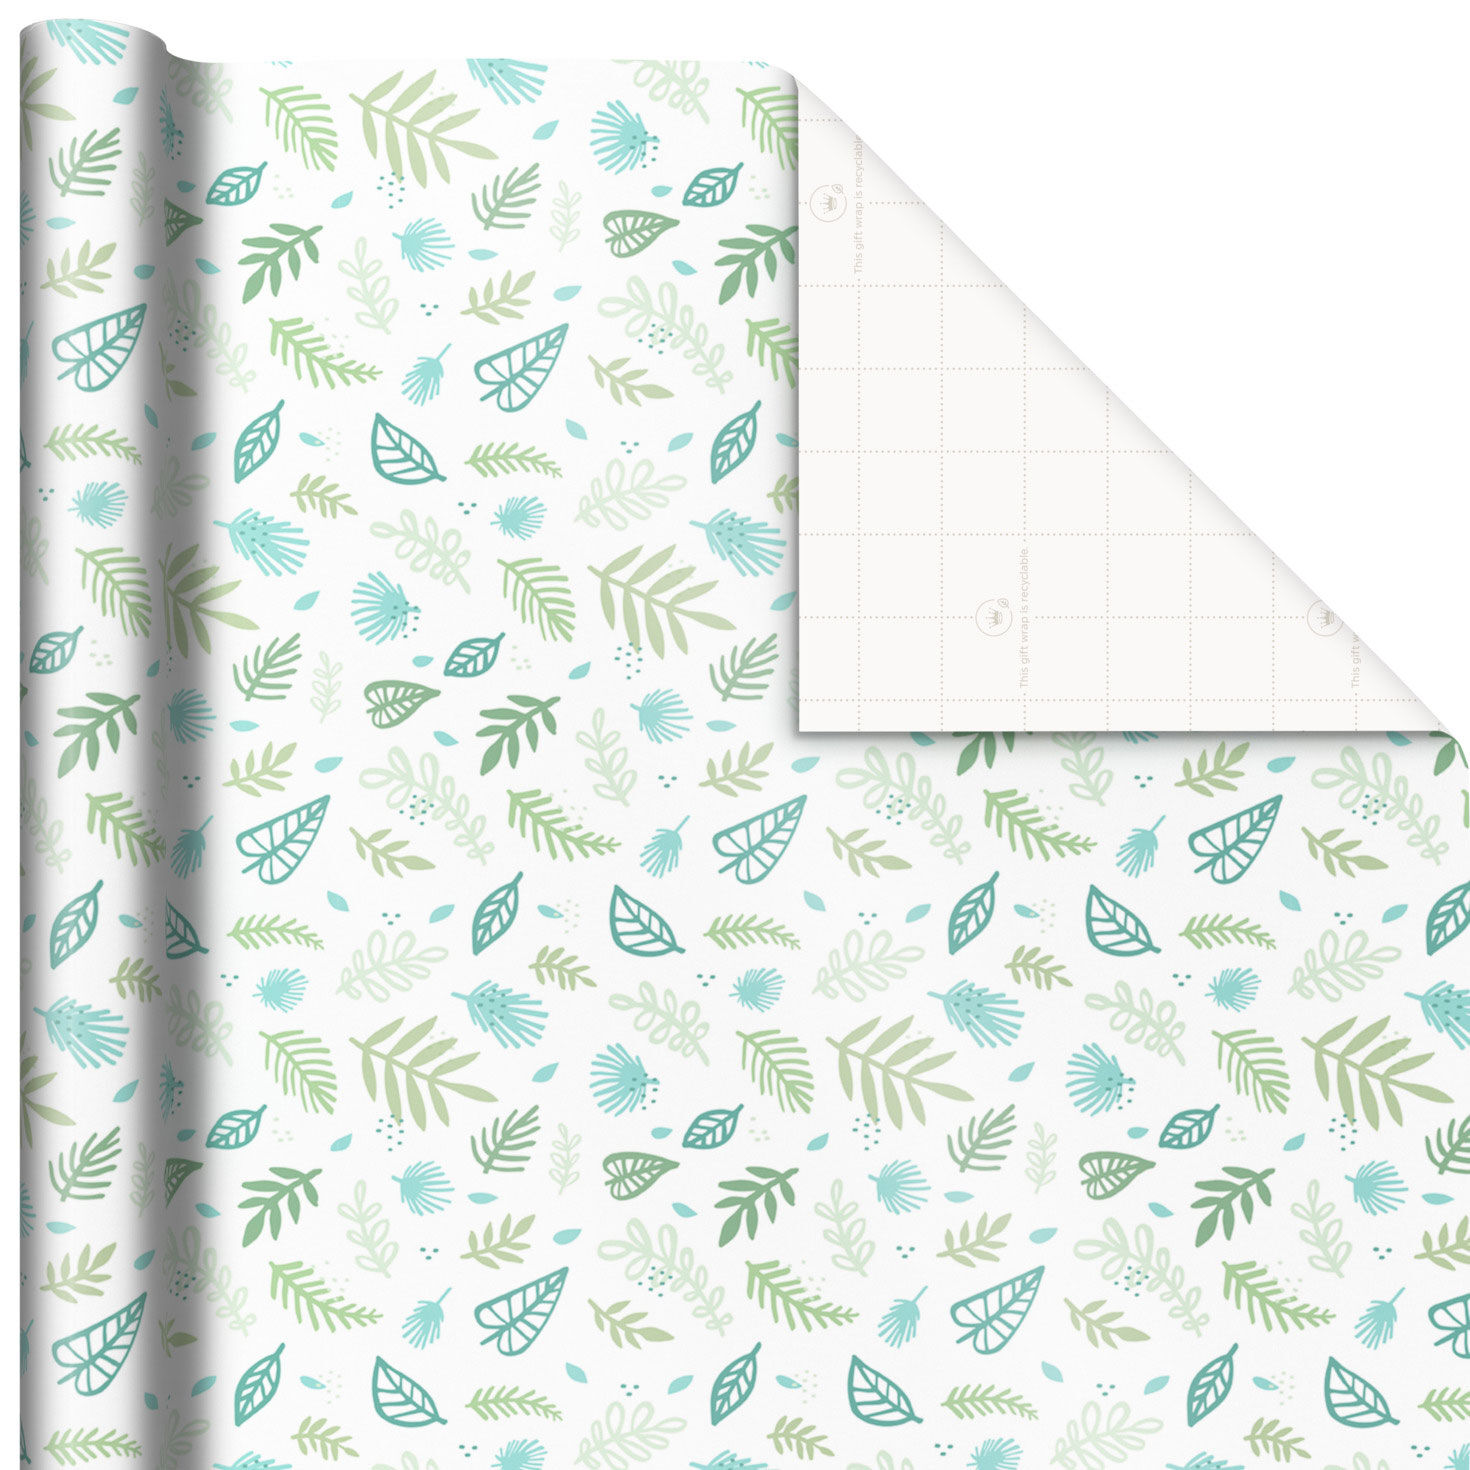 Green Leaves on White Wrapping Paper, 20 sq. ft. - Wrapping Paper - Hallmark